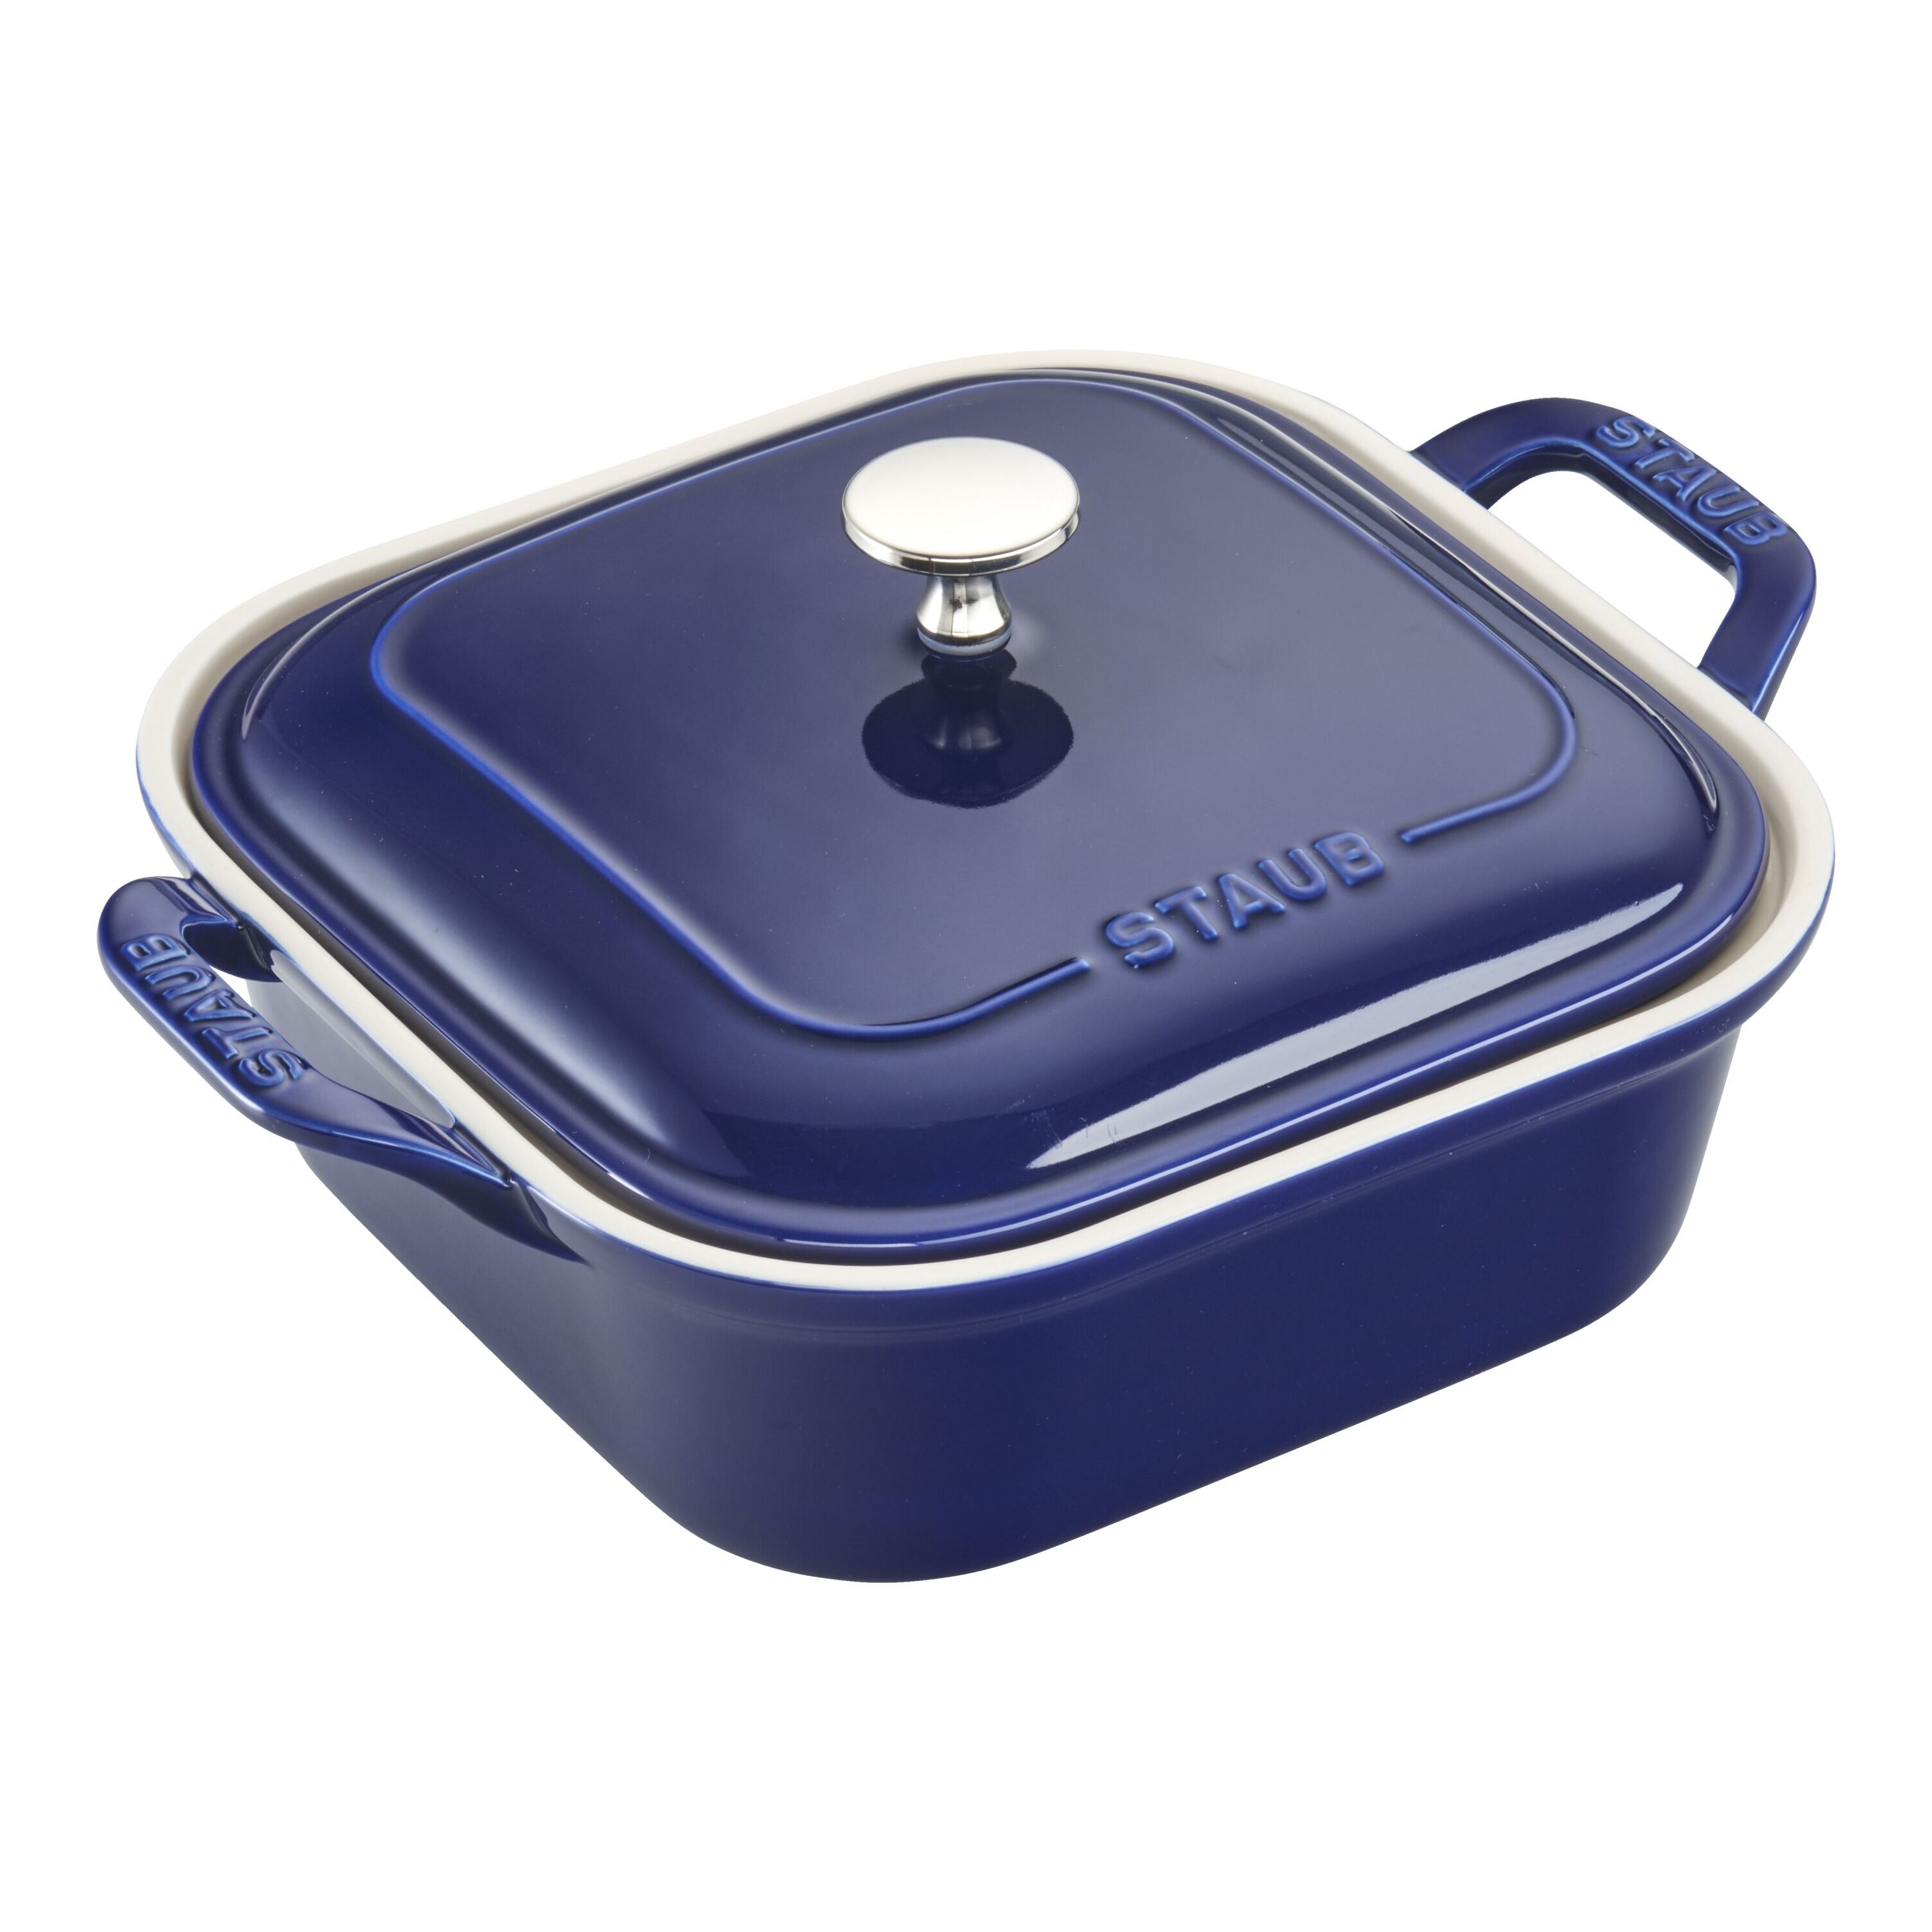 Our favorite bakeware set is now at the lowest price of the season exc, staub